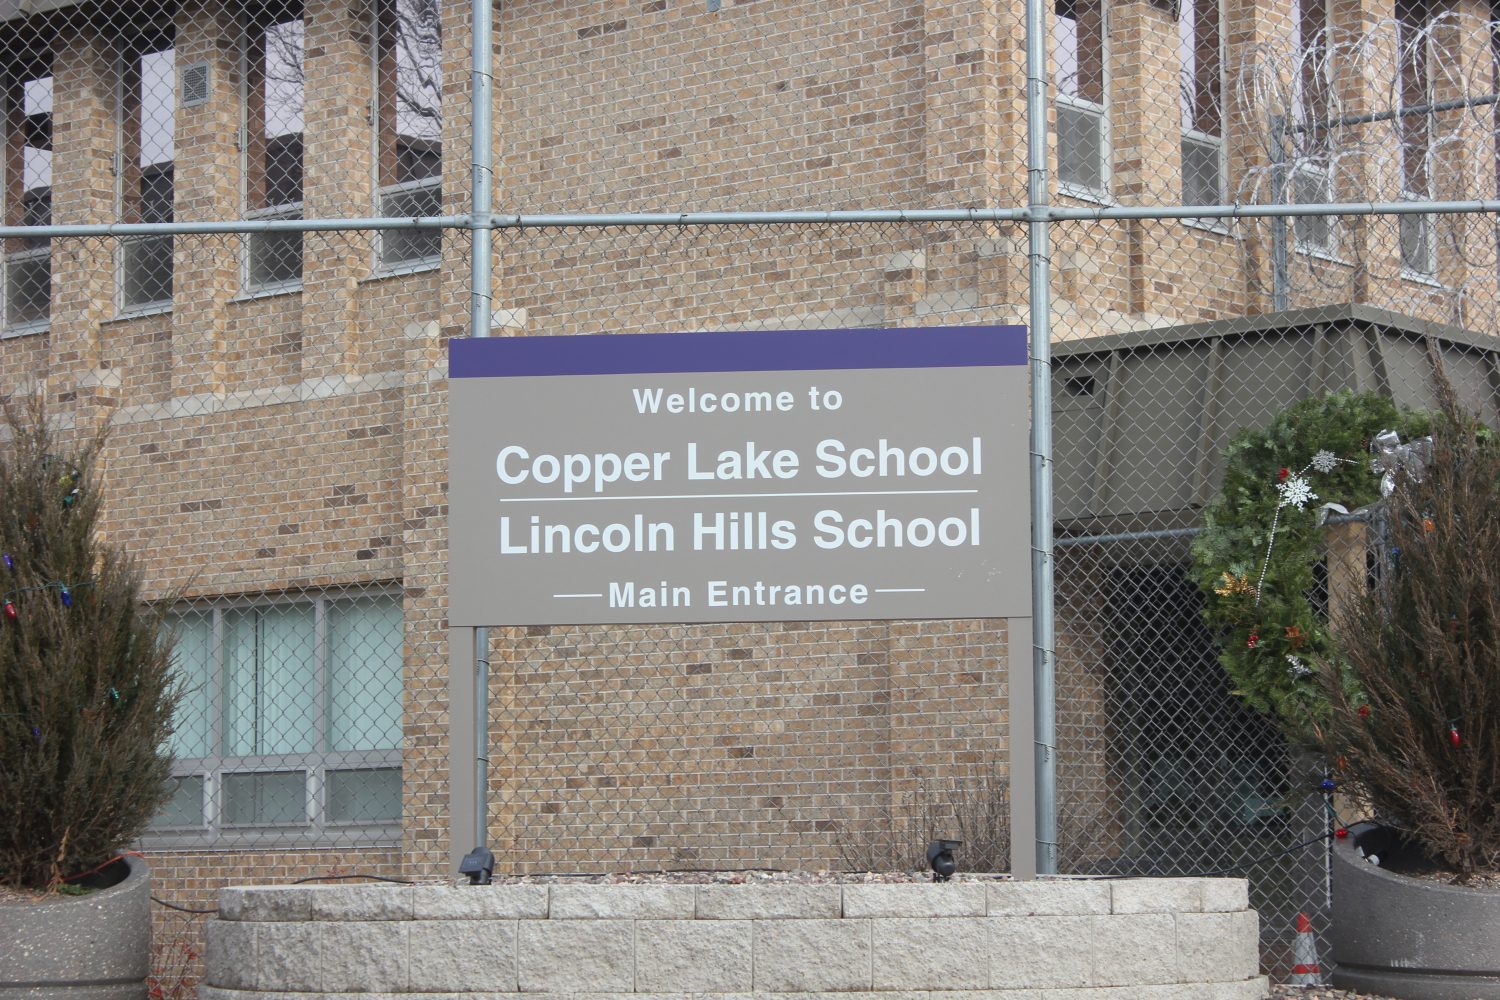 Monitor Report highlights improvements at Lincoln Hills/Copper Lake Schools